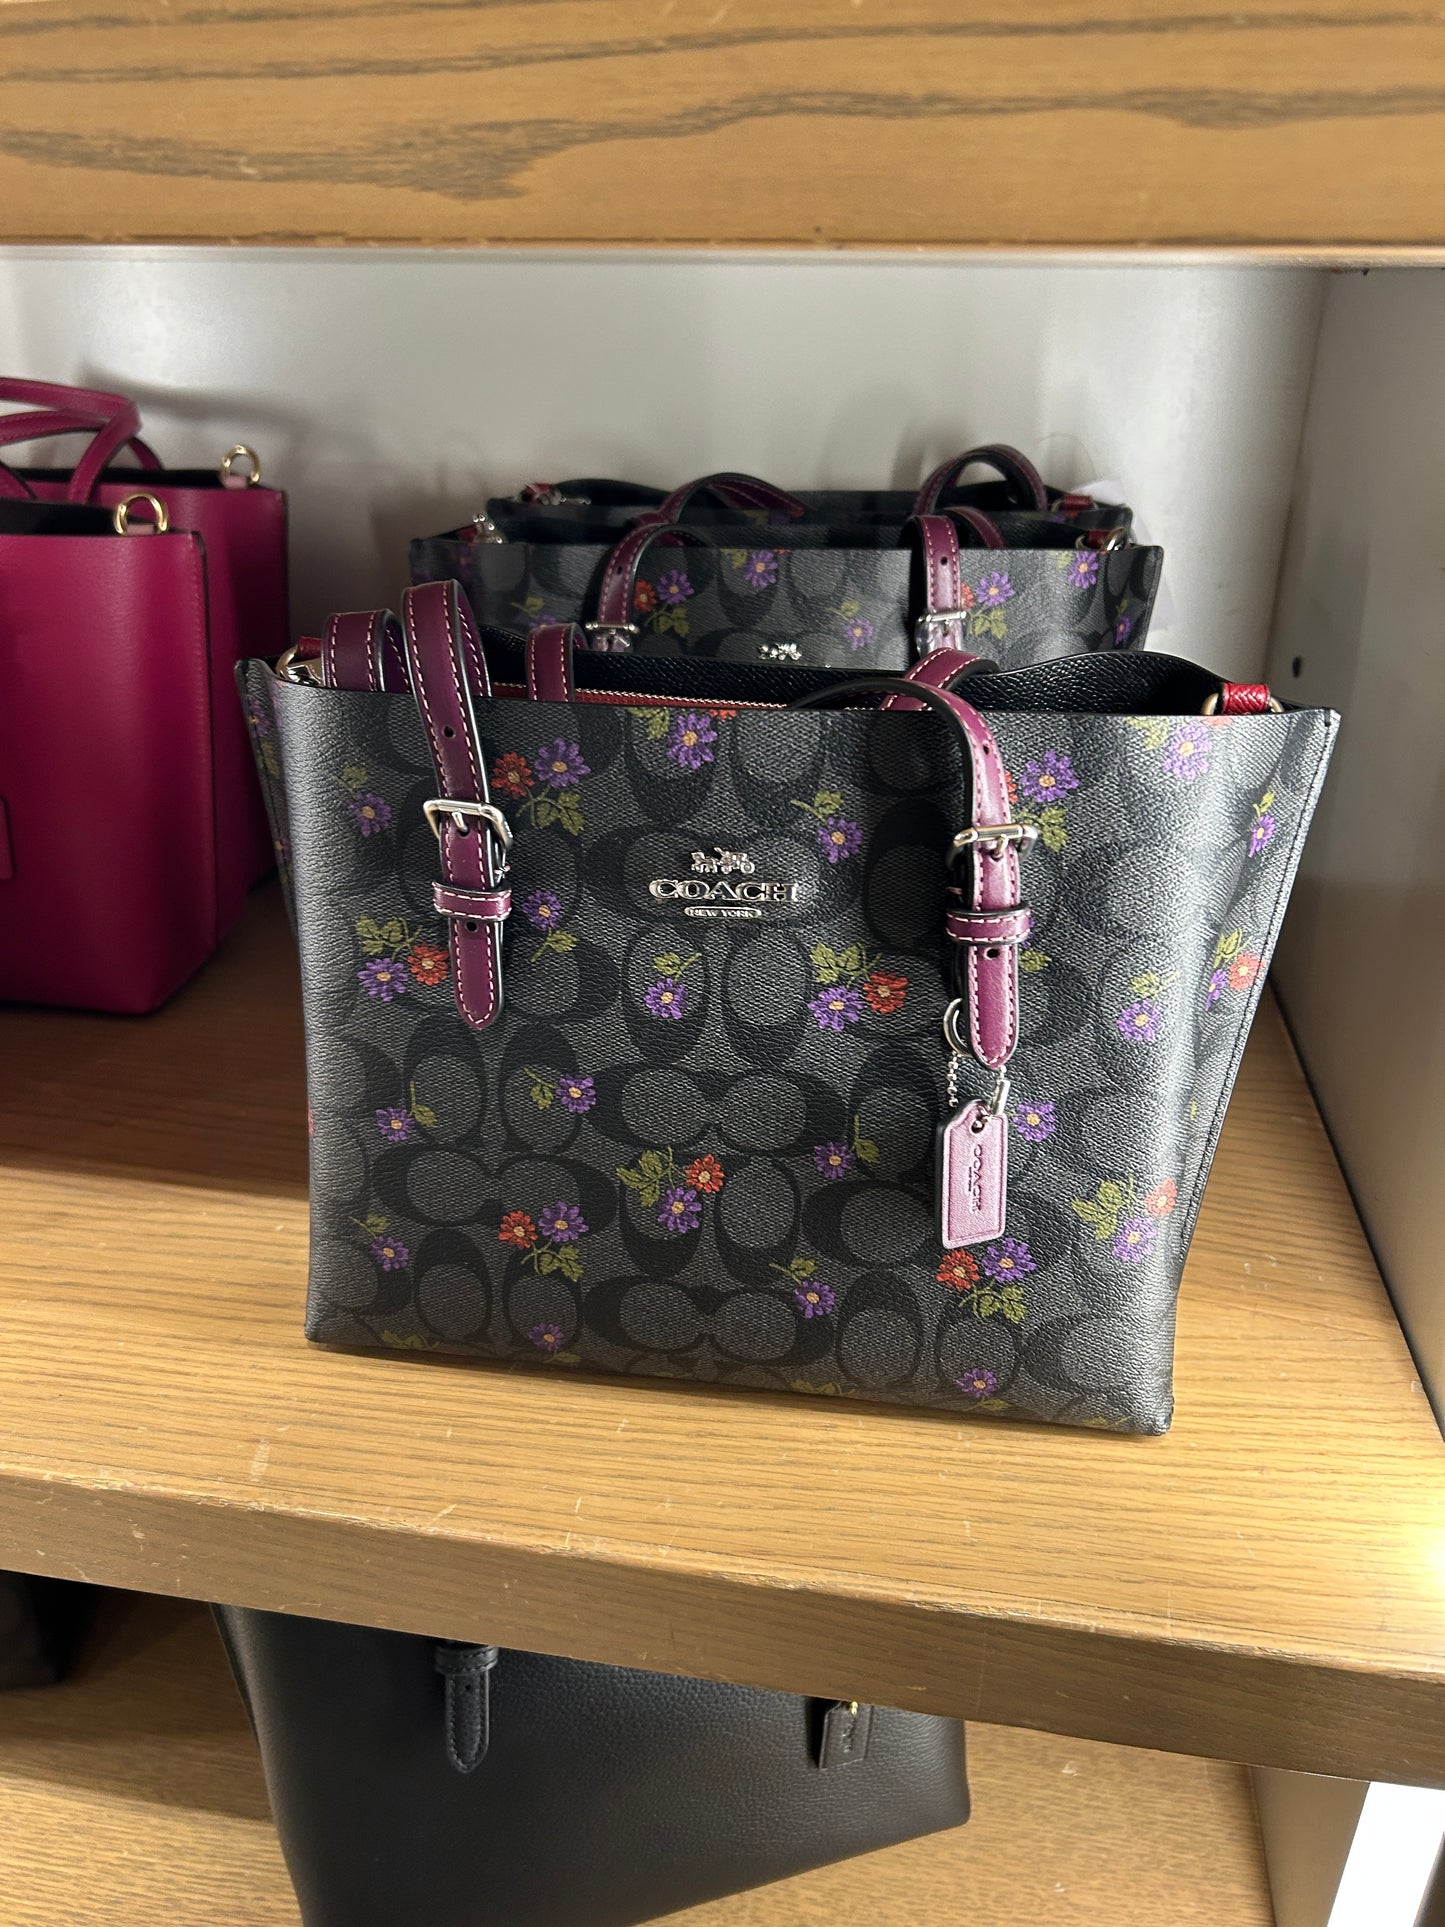 Coach Mollie Tote 25 In Signature Canvas With Country Floral Print In Deep Berry (Pre-Order)